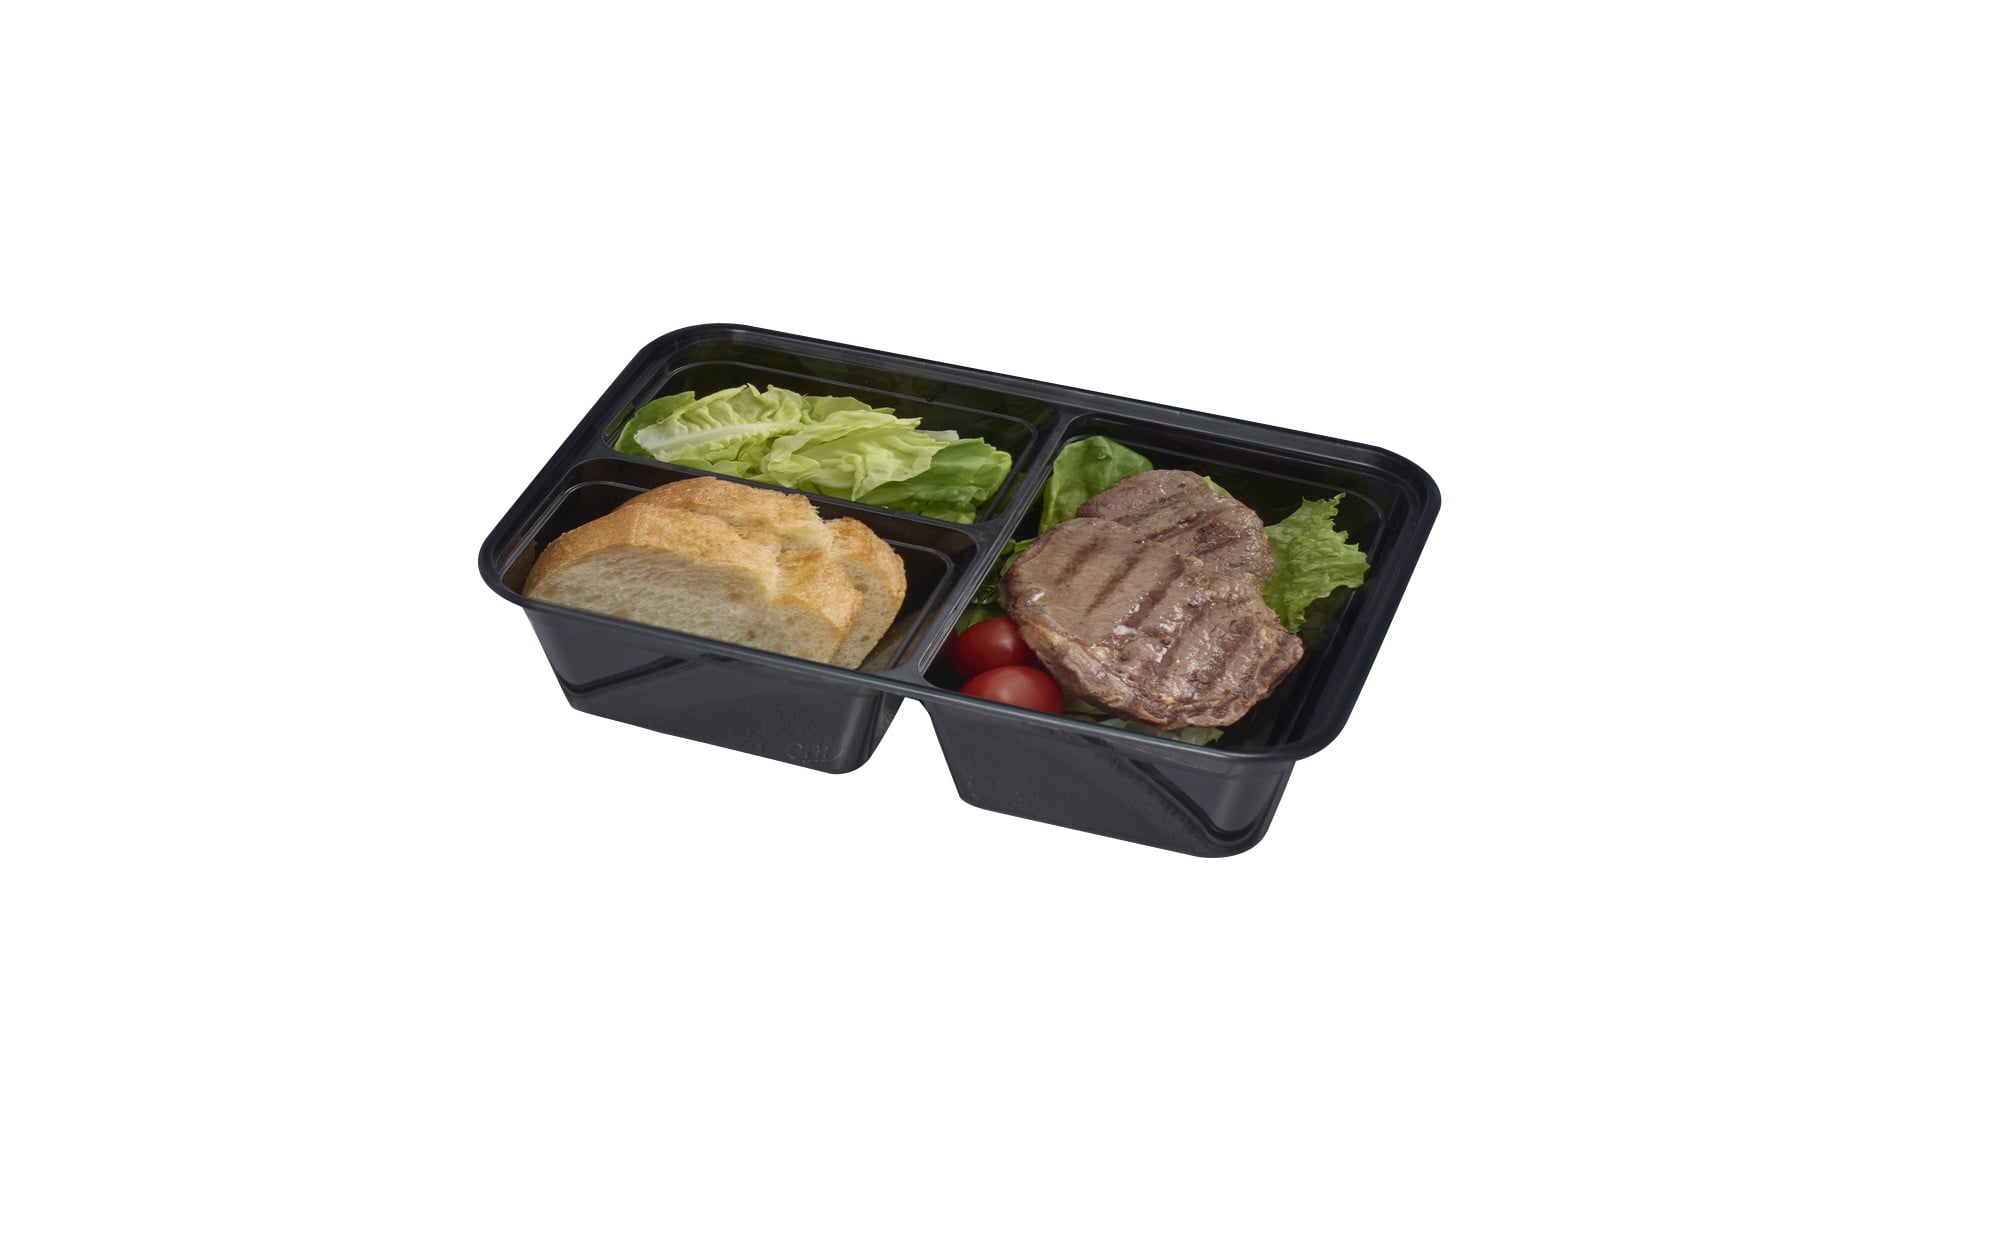 12 Bulk Home Basic 10 Piece 3 Compartment BpA-Free Plastic Meal Prep  Containers, Black - at 